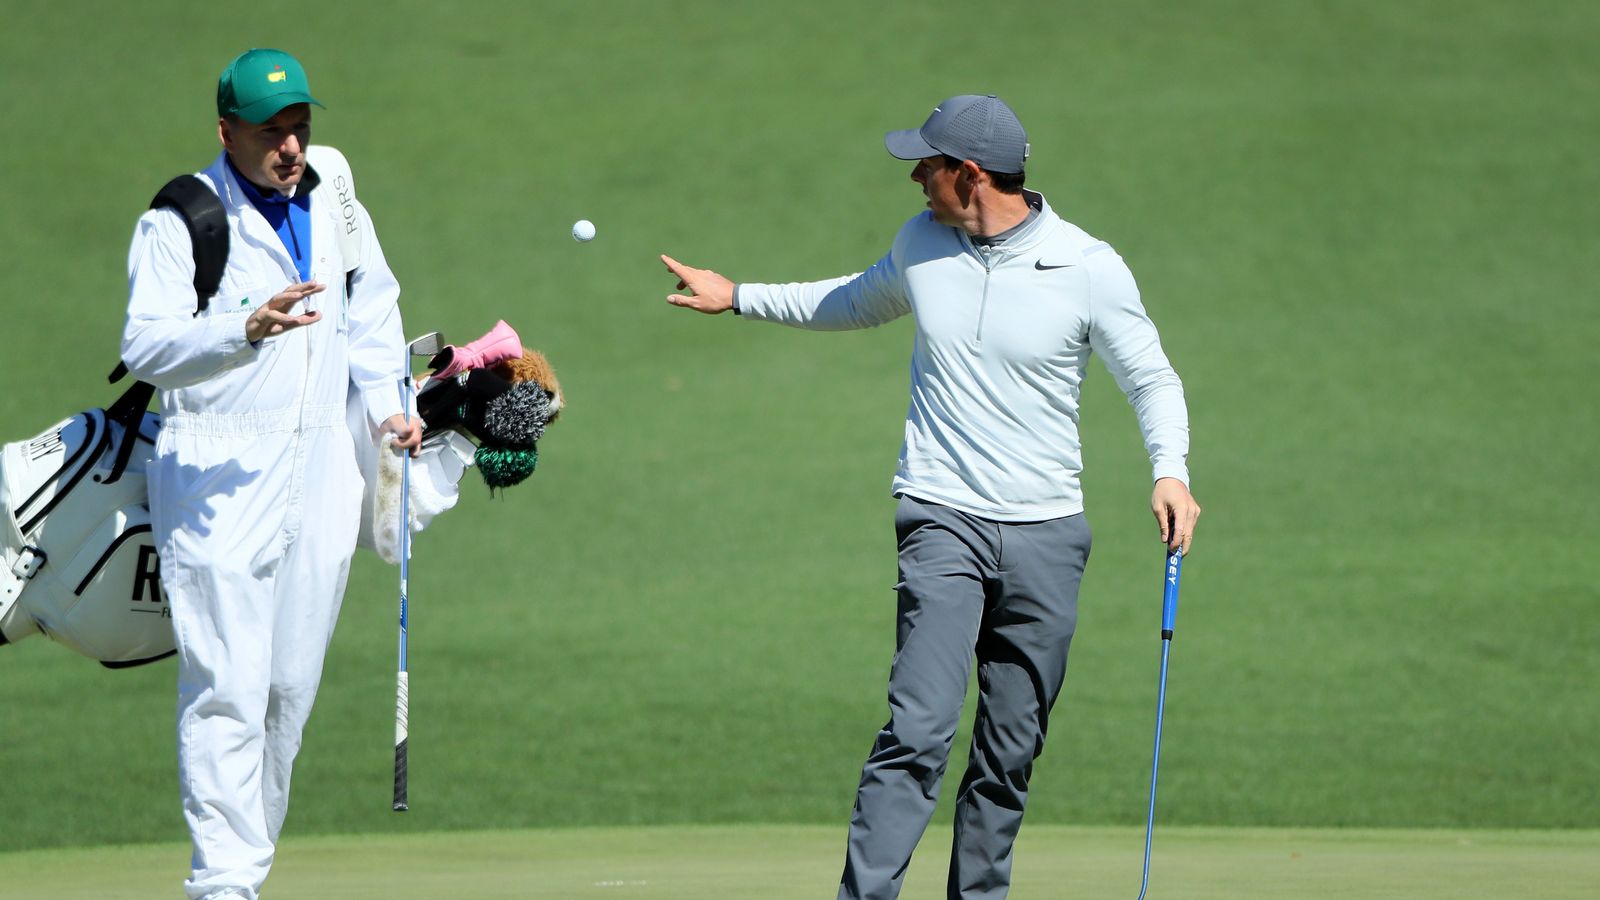 Five of the best player/caddie partnerships in professional golf, Golf  News